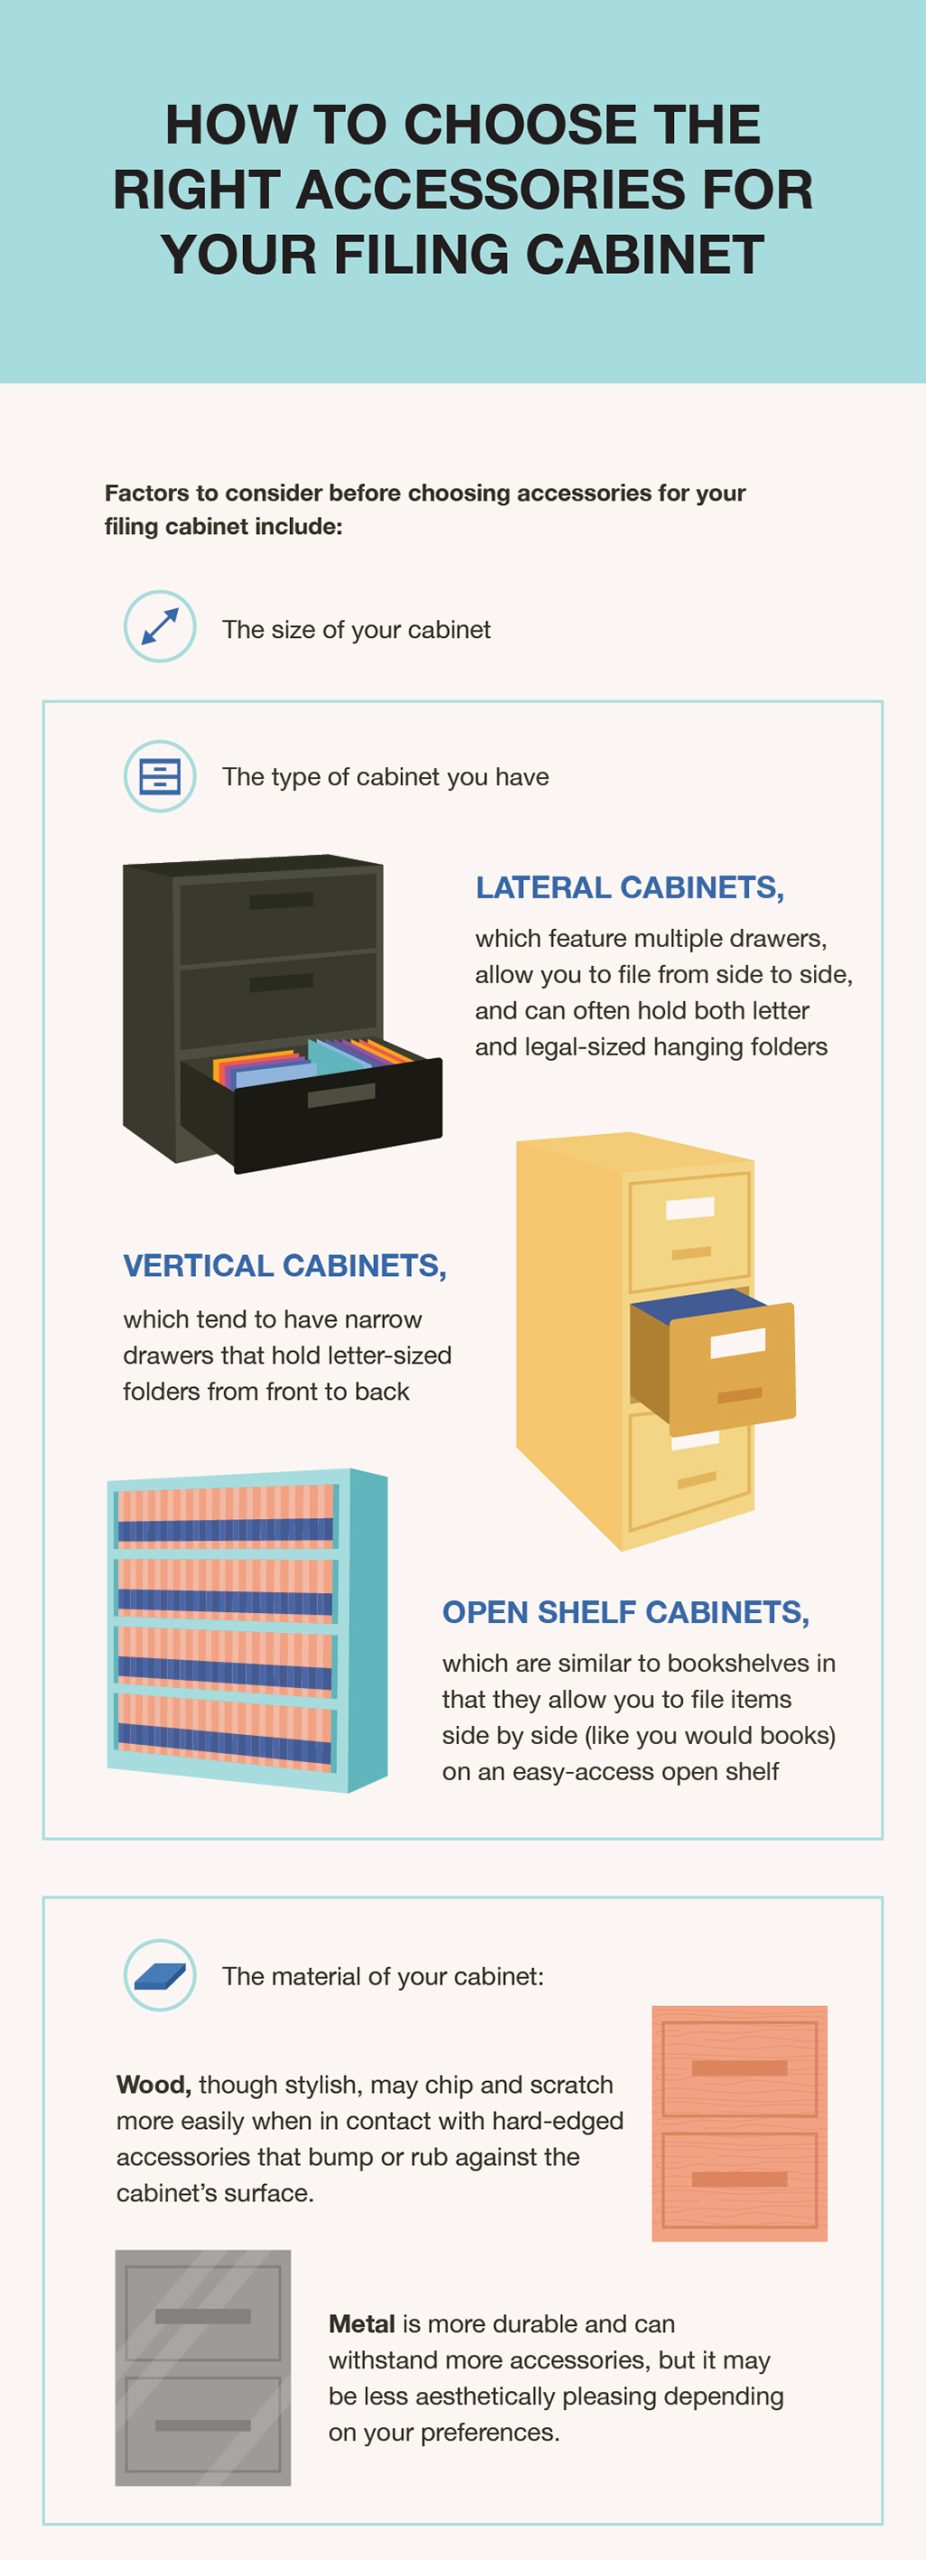 Make filing system more efficient with filing accessories - Quill